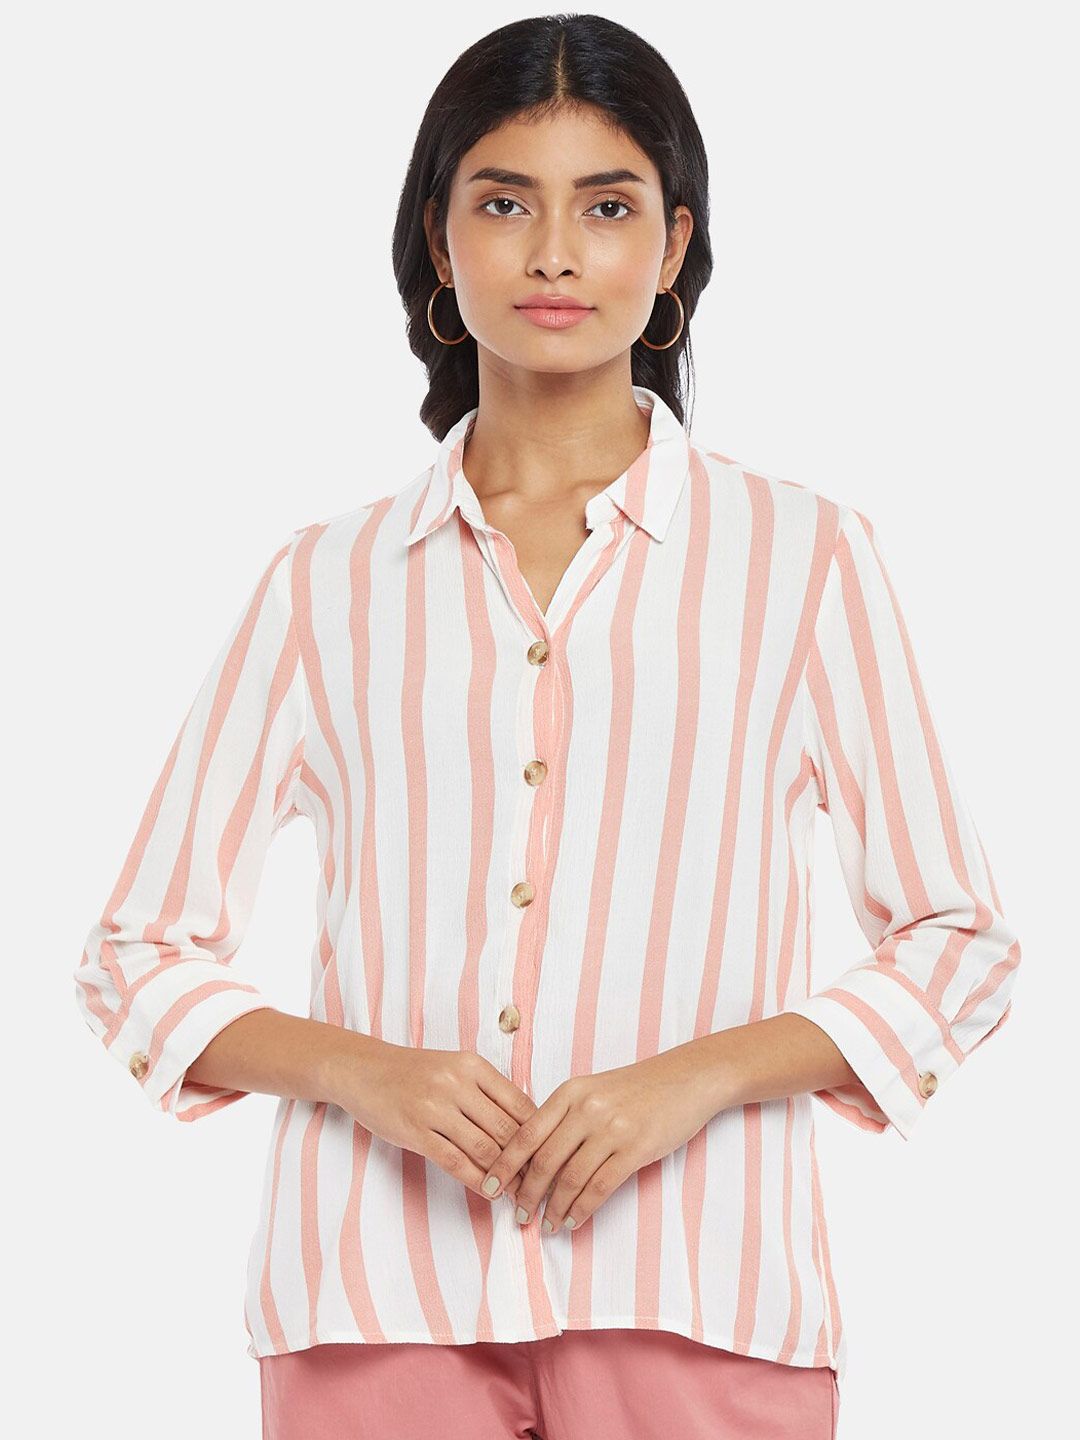 Honey by Pantaloons Women Peach & White Striped Shirt Style Top Price in India